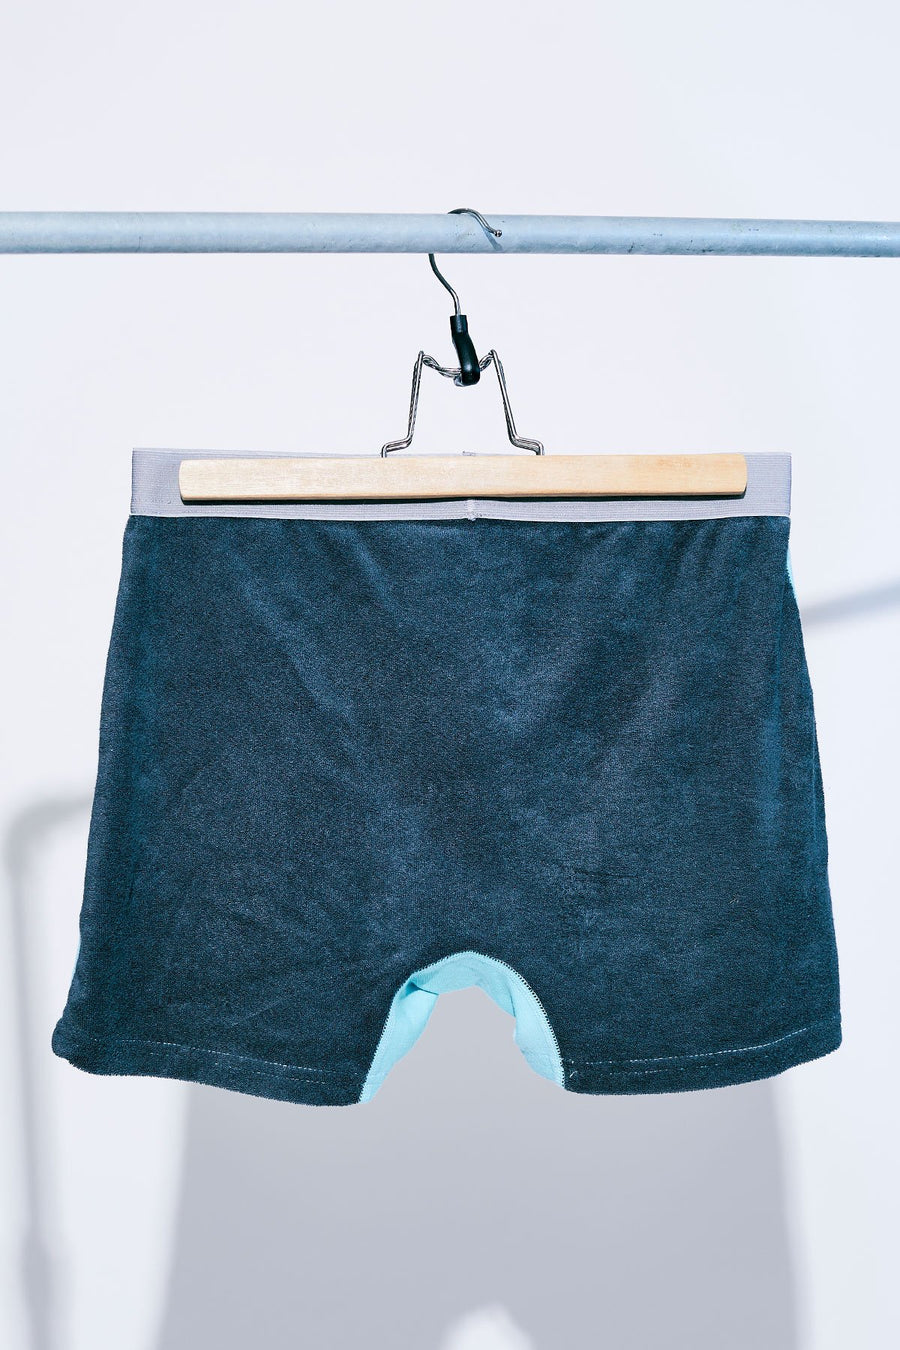 Hybrid wear BOXER（Punch×Pile）Mint×Chacoal Gray